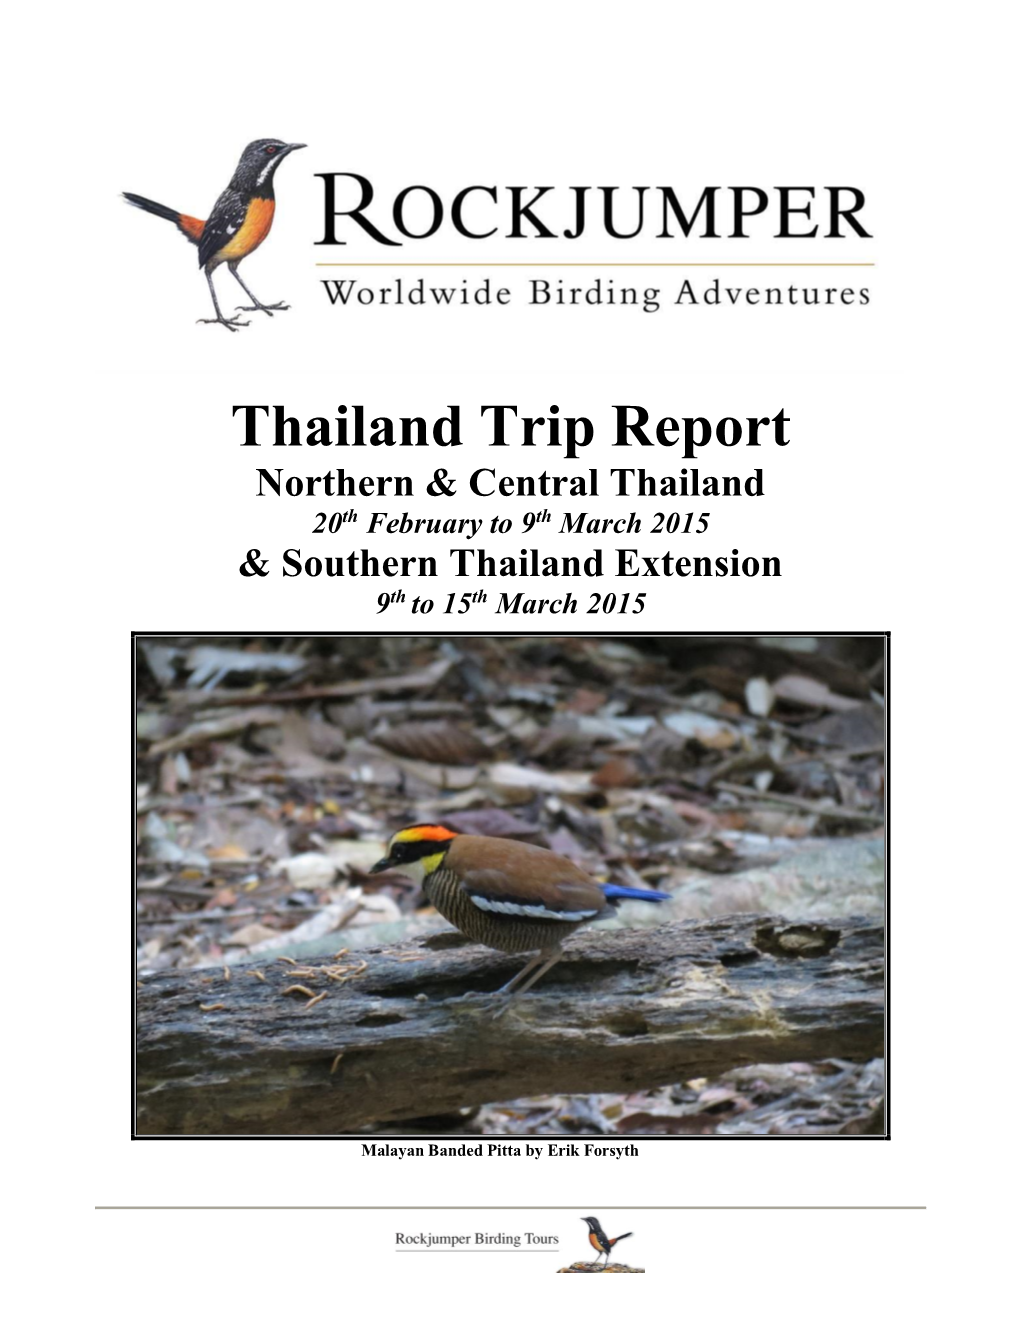 Thailand Trip Report Northern & Central Thailand 20Th February to 9Th March 2015 & Southern Thailand Extension 9Th to 15Th March 2015